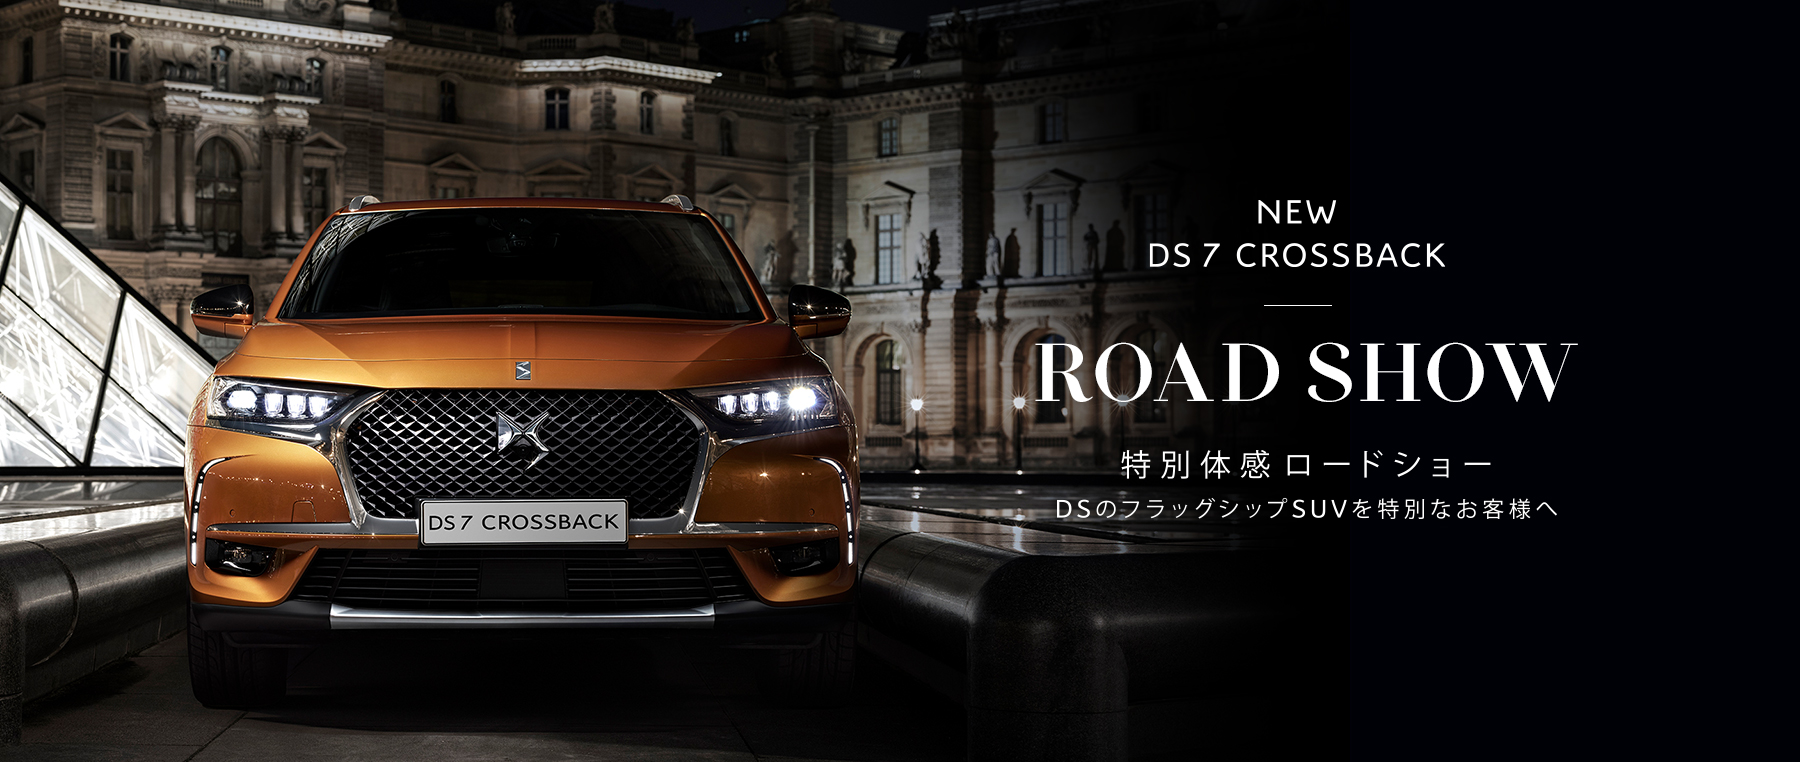 【DS7 CROSSBACK ROAD SHOW】